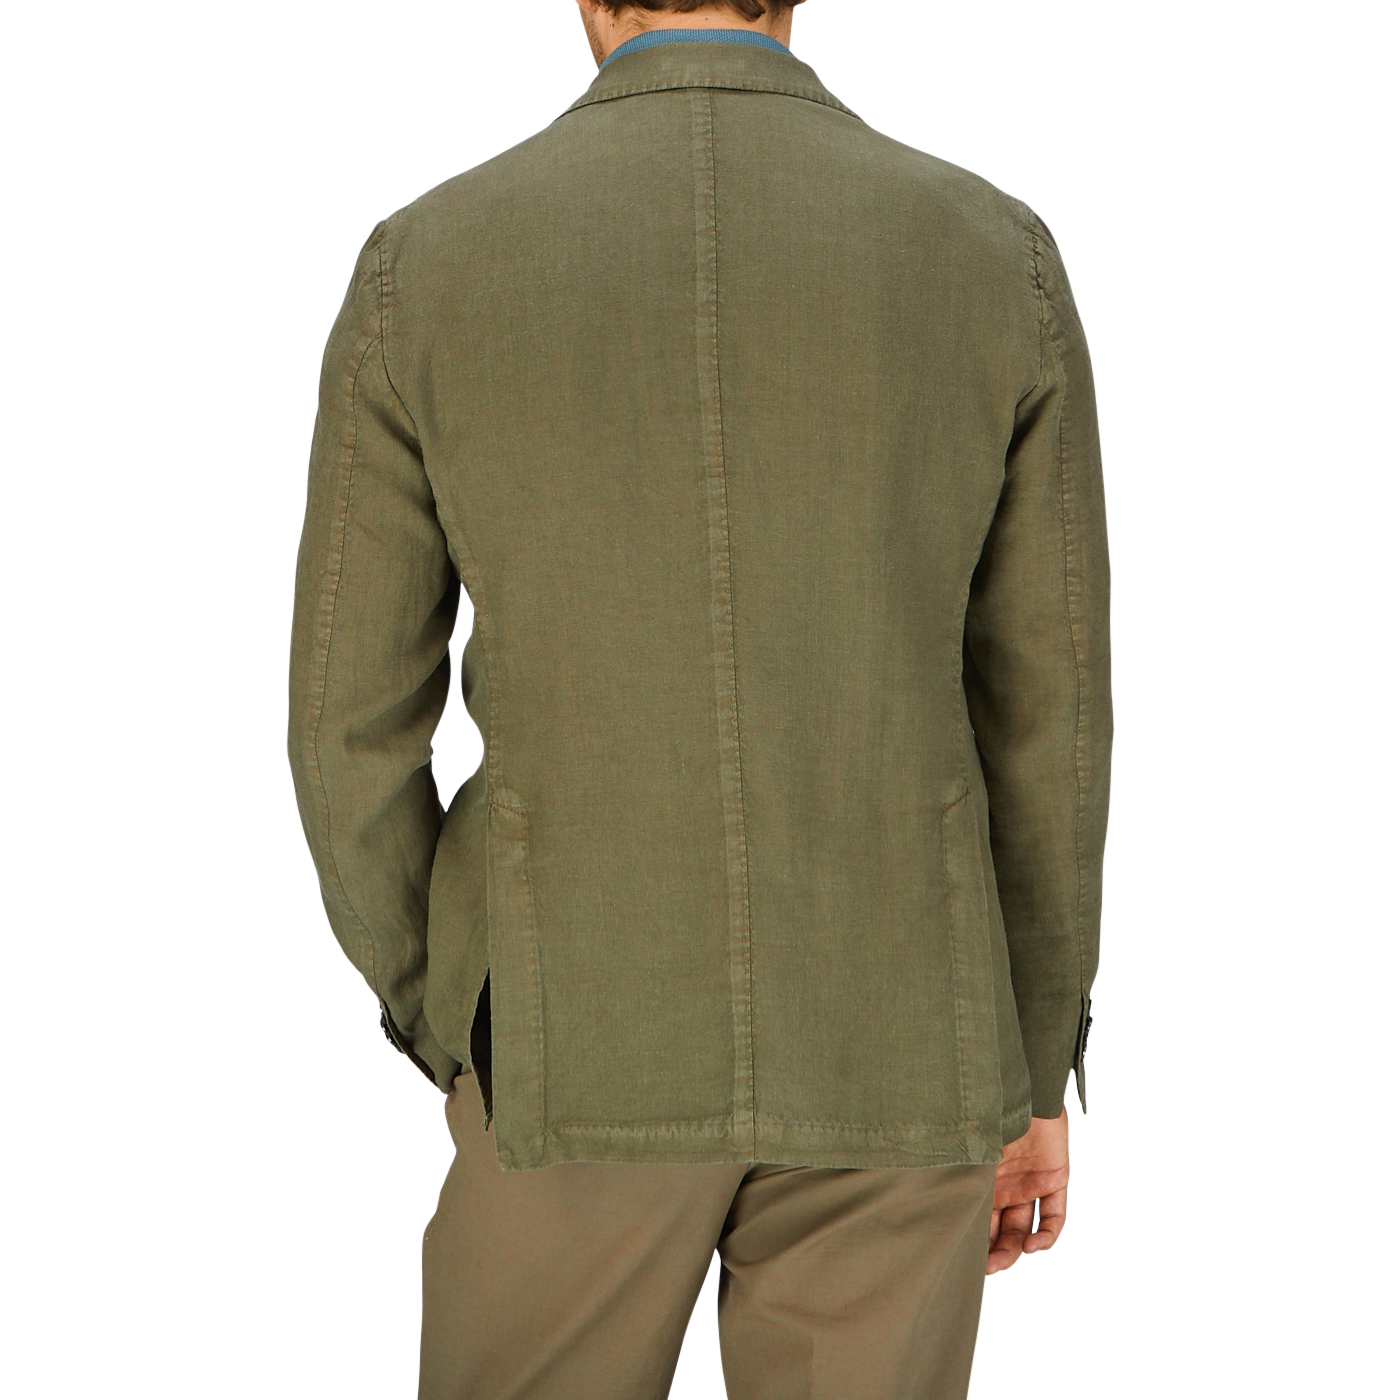 Man wearing a Grass Green Washed Linen Blazer by L.B.M. 1911 seen from the back, crafted in Italy.